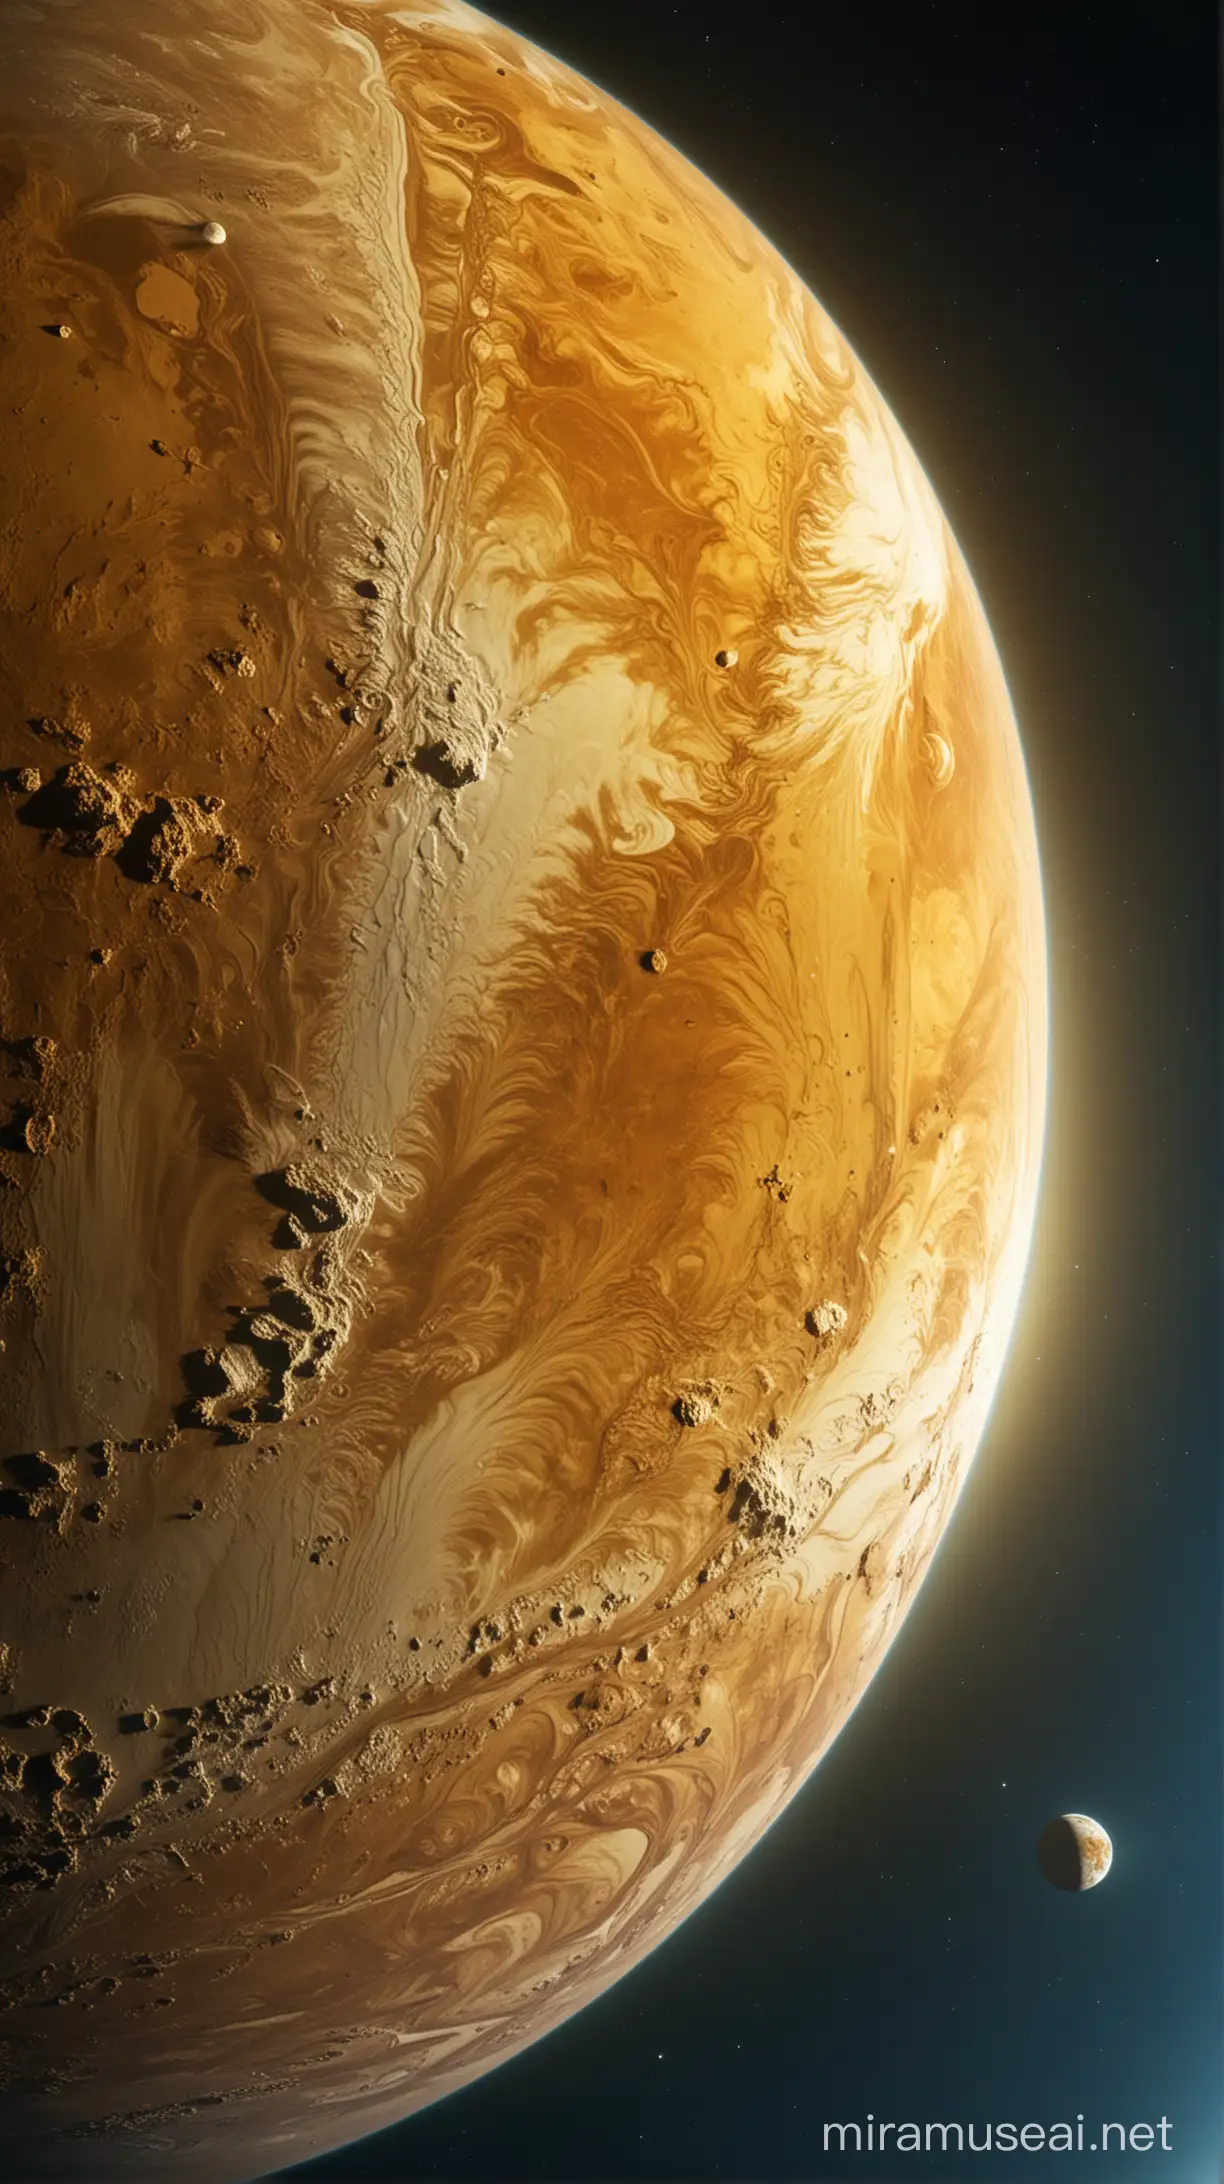 Stunning View of Venus Atmosphere from Space